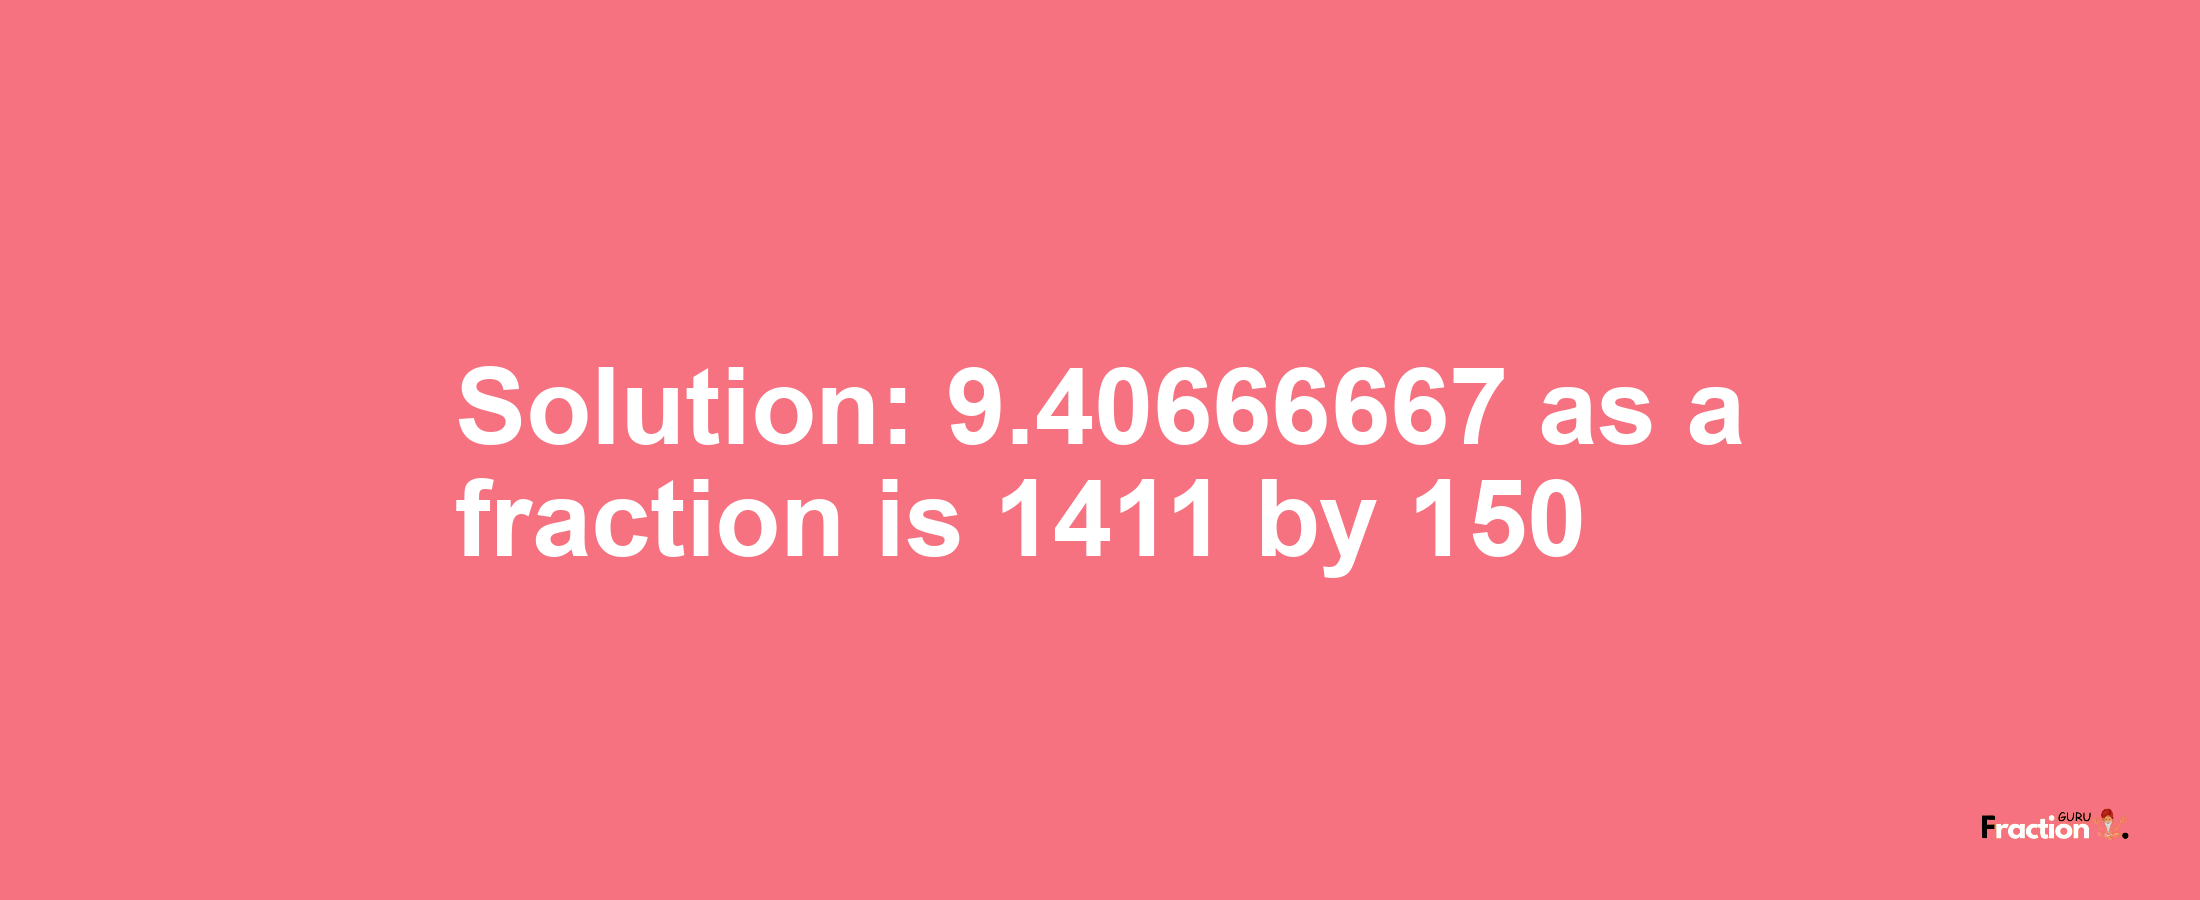 Solution:9.40666667 as a fraction is 1411/150